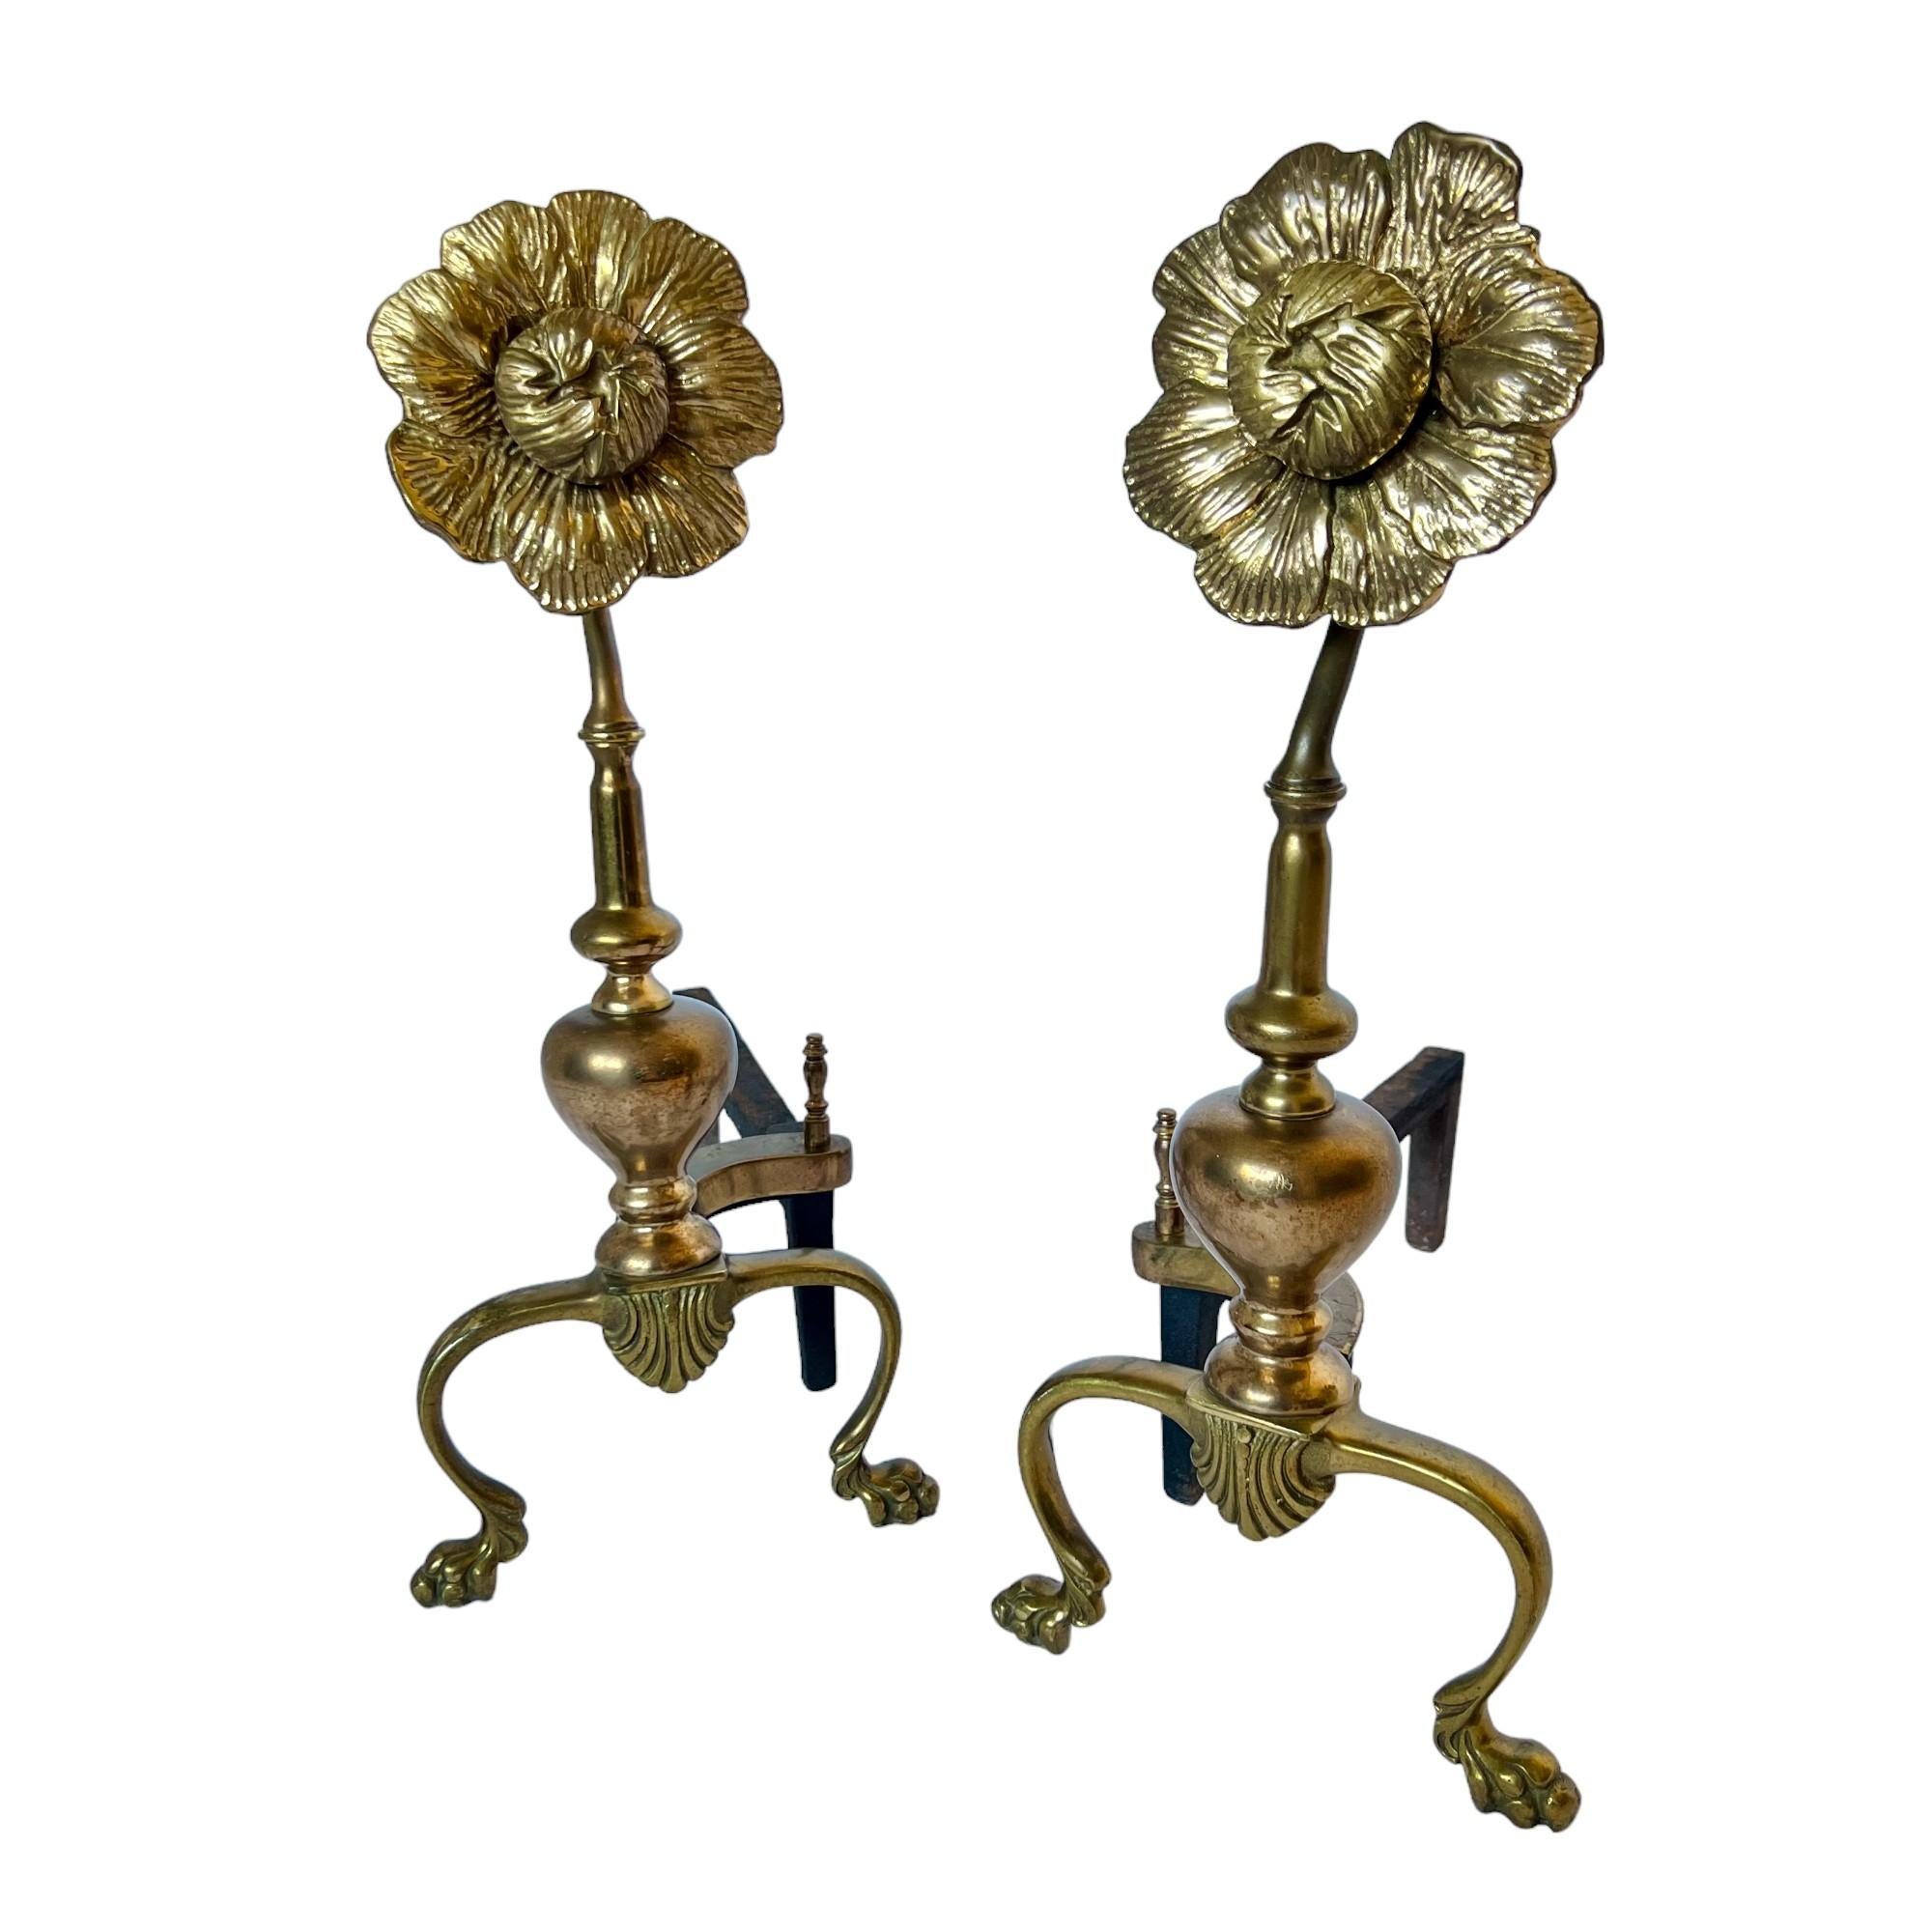 American Mid 20th Century Brass Flower Andirons or Chenets, a Pair